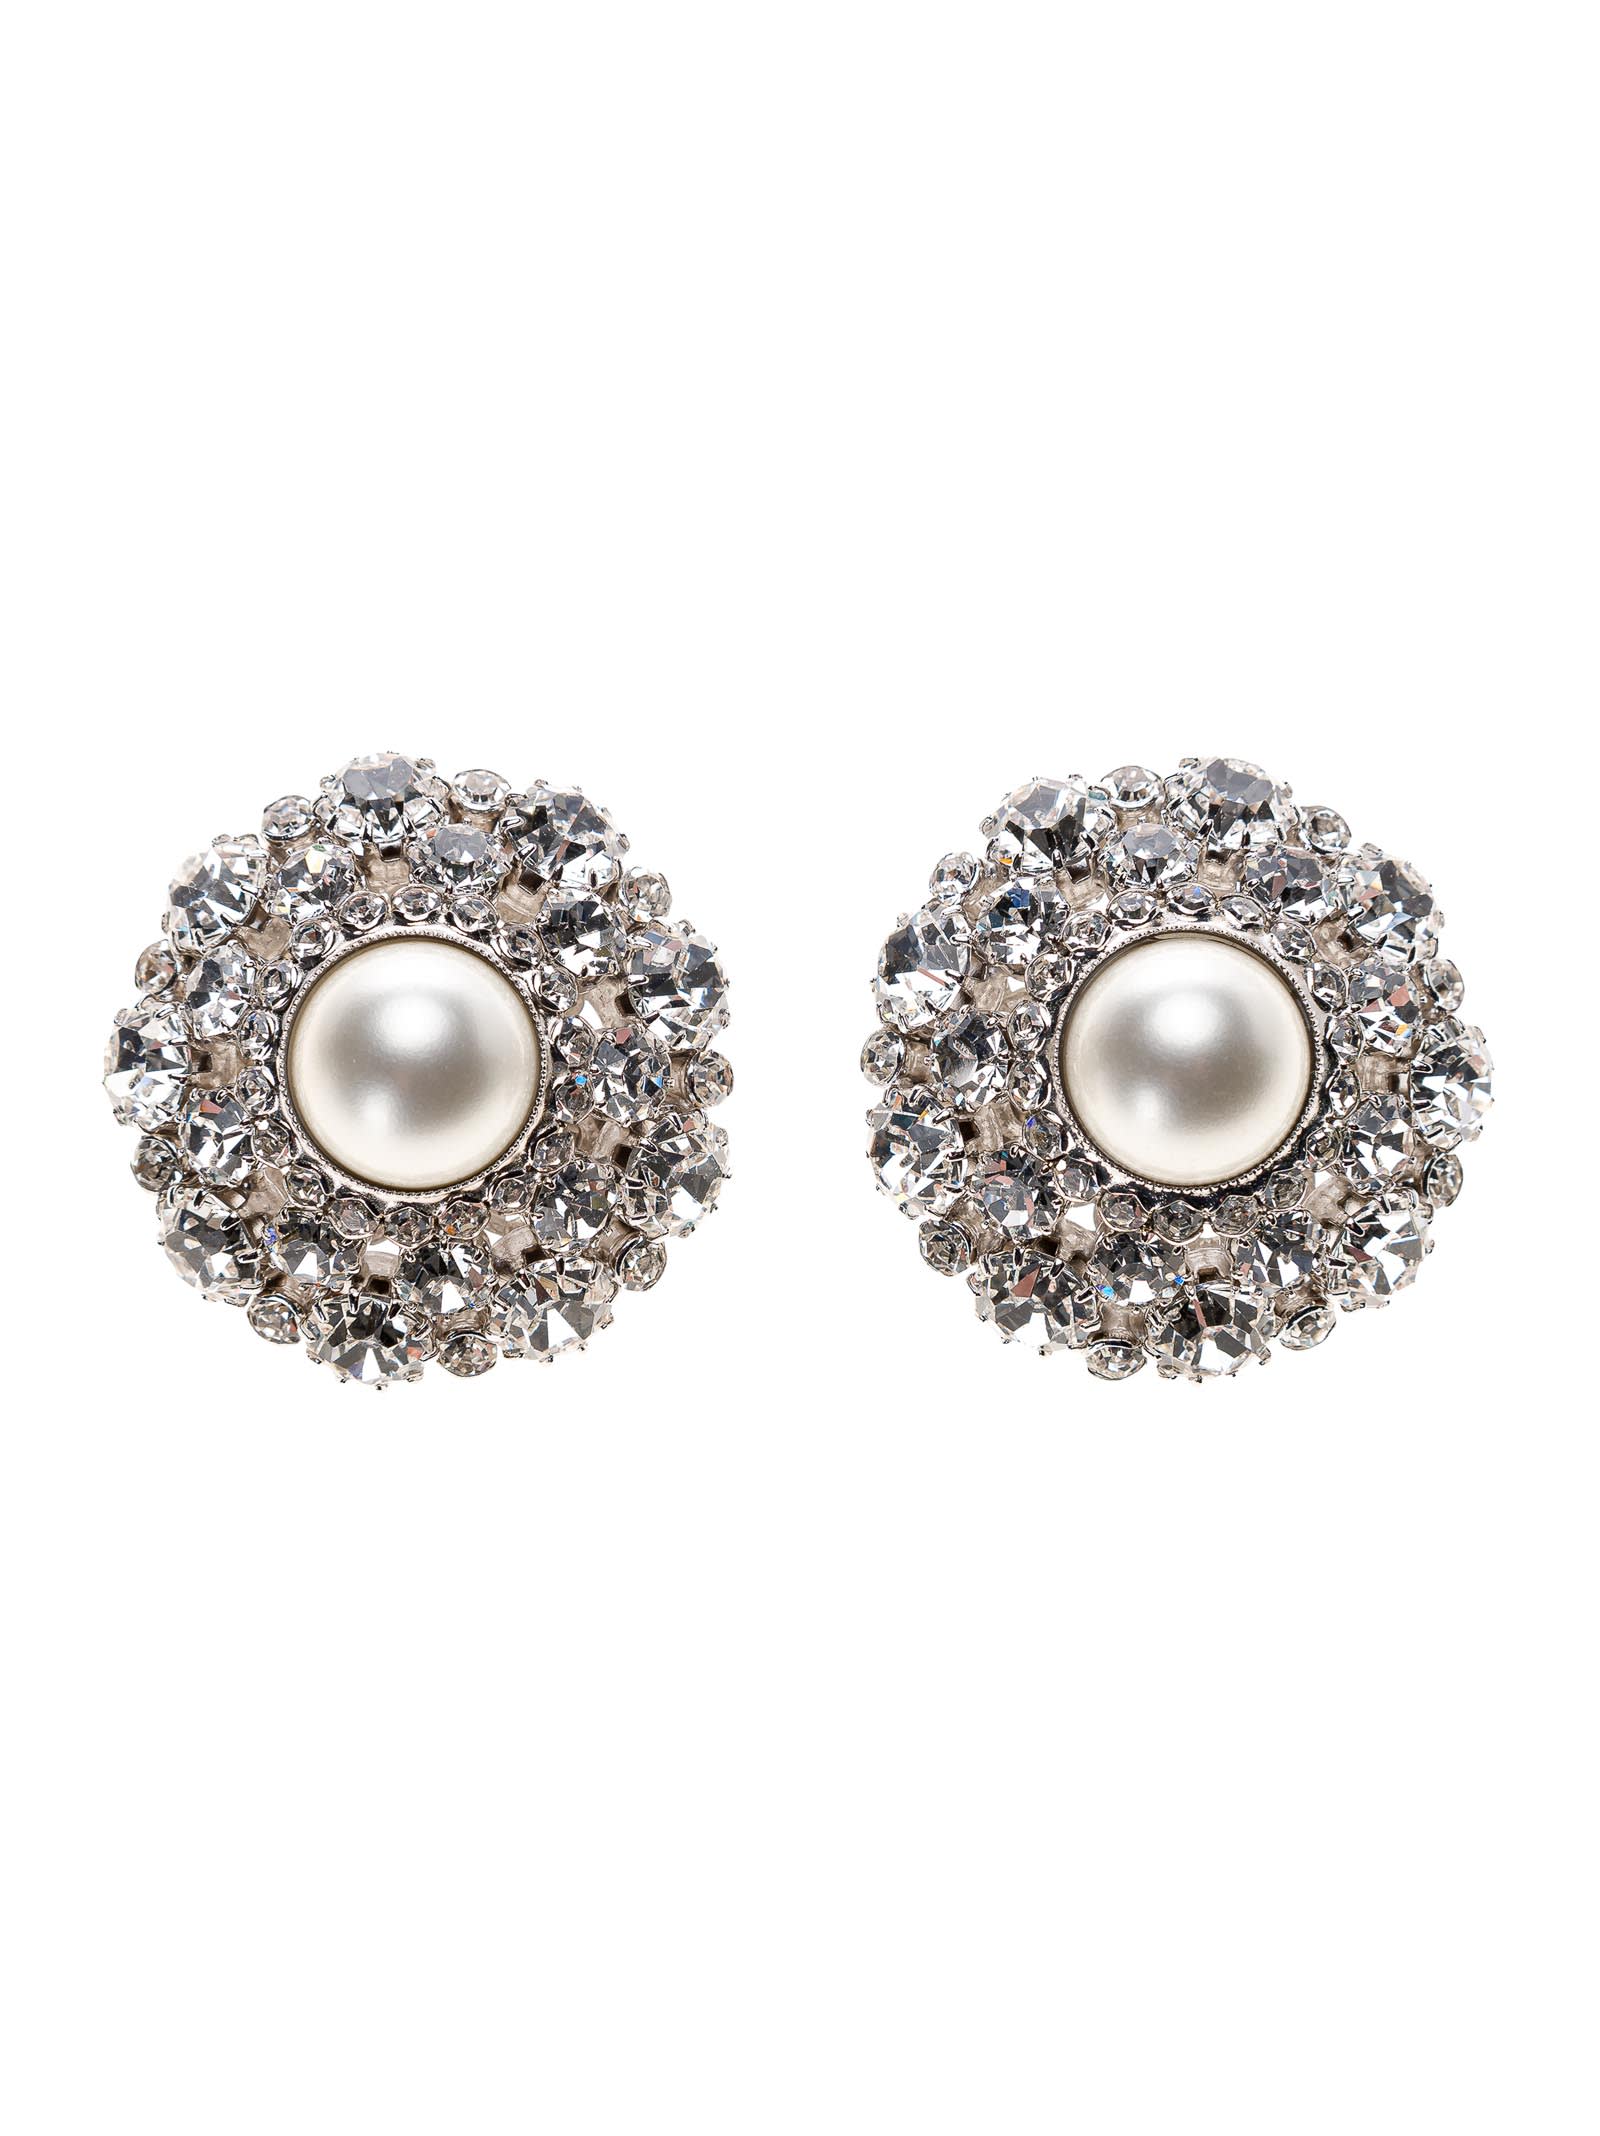 Alessandra Rich Round Crystal Pearl Earrings